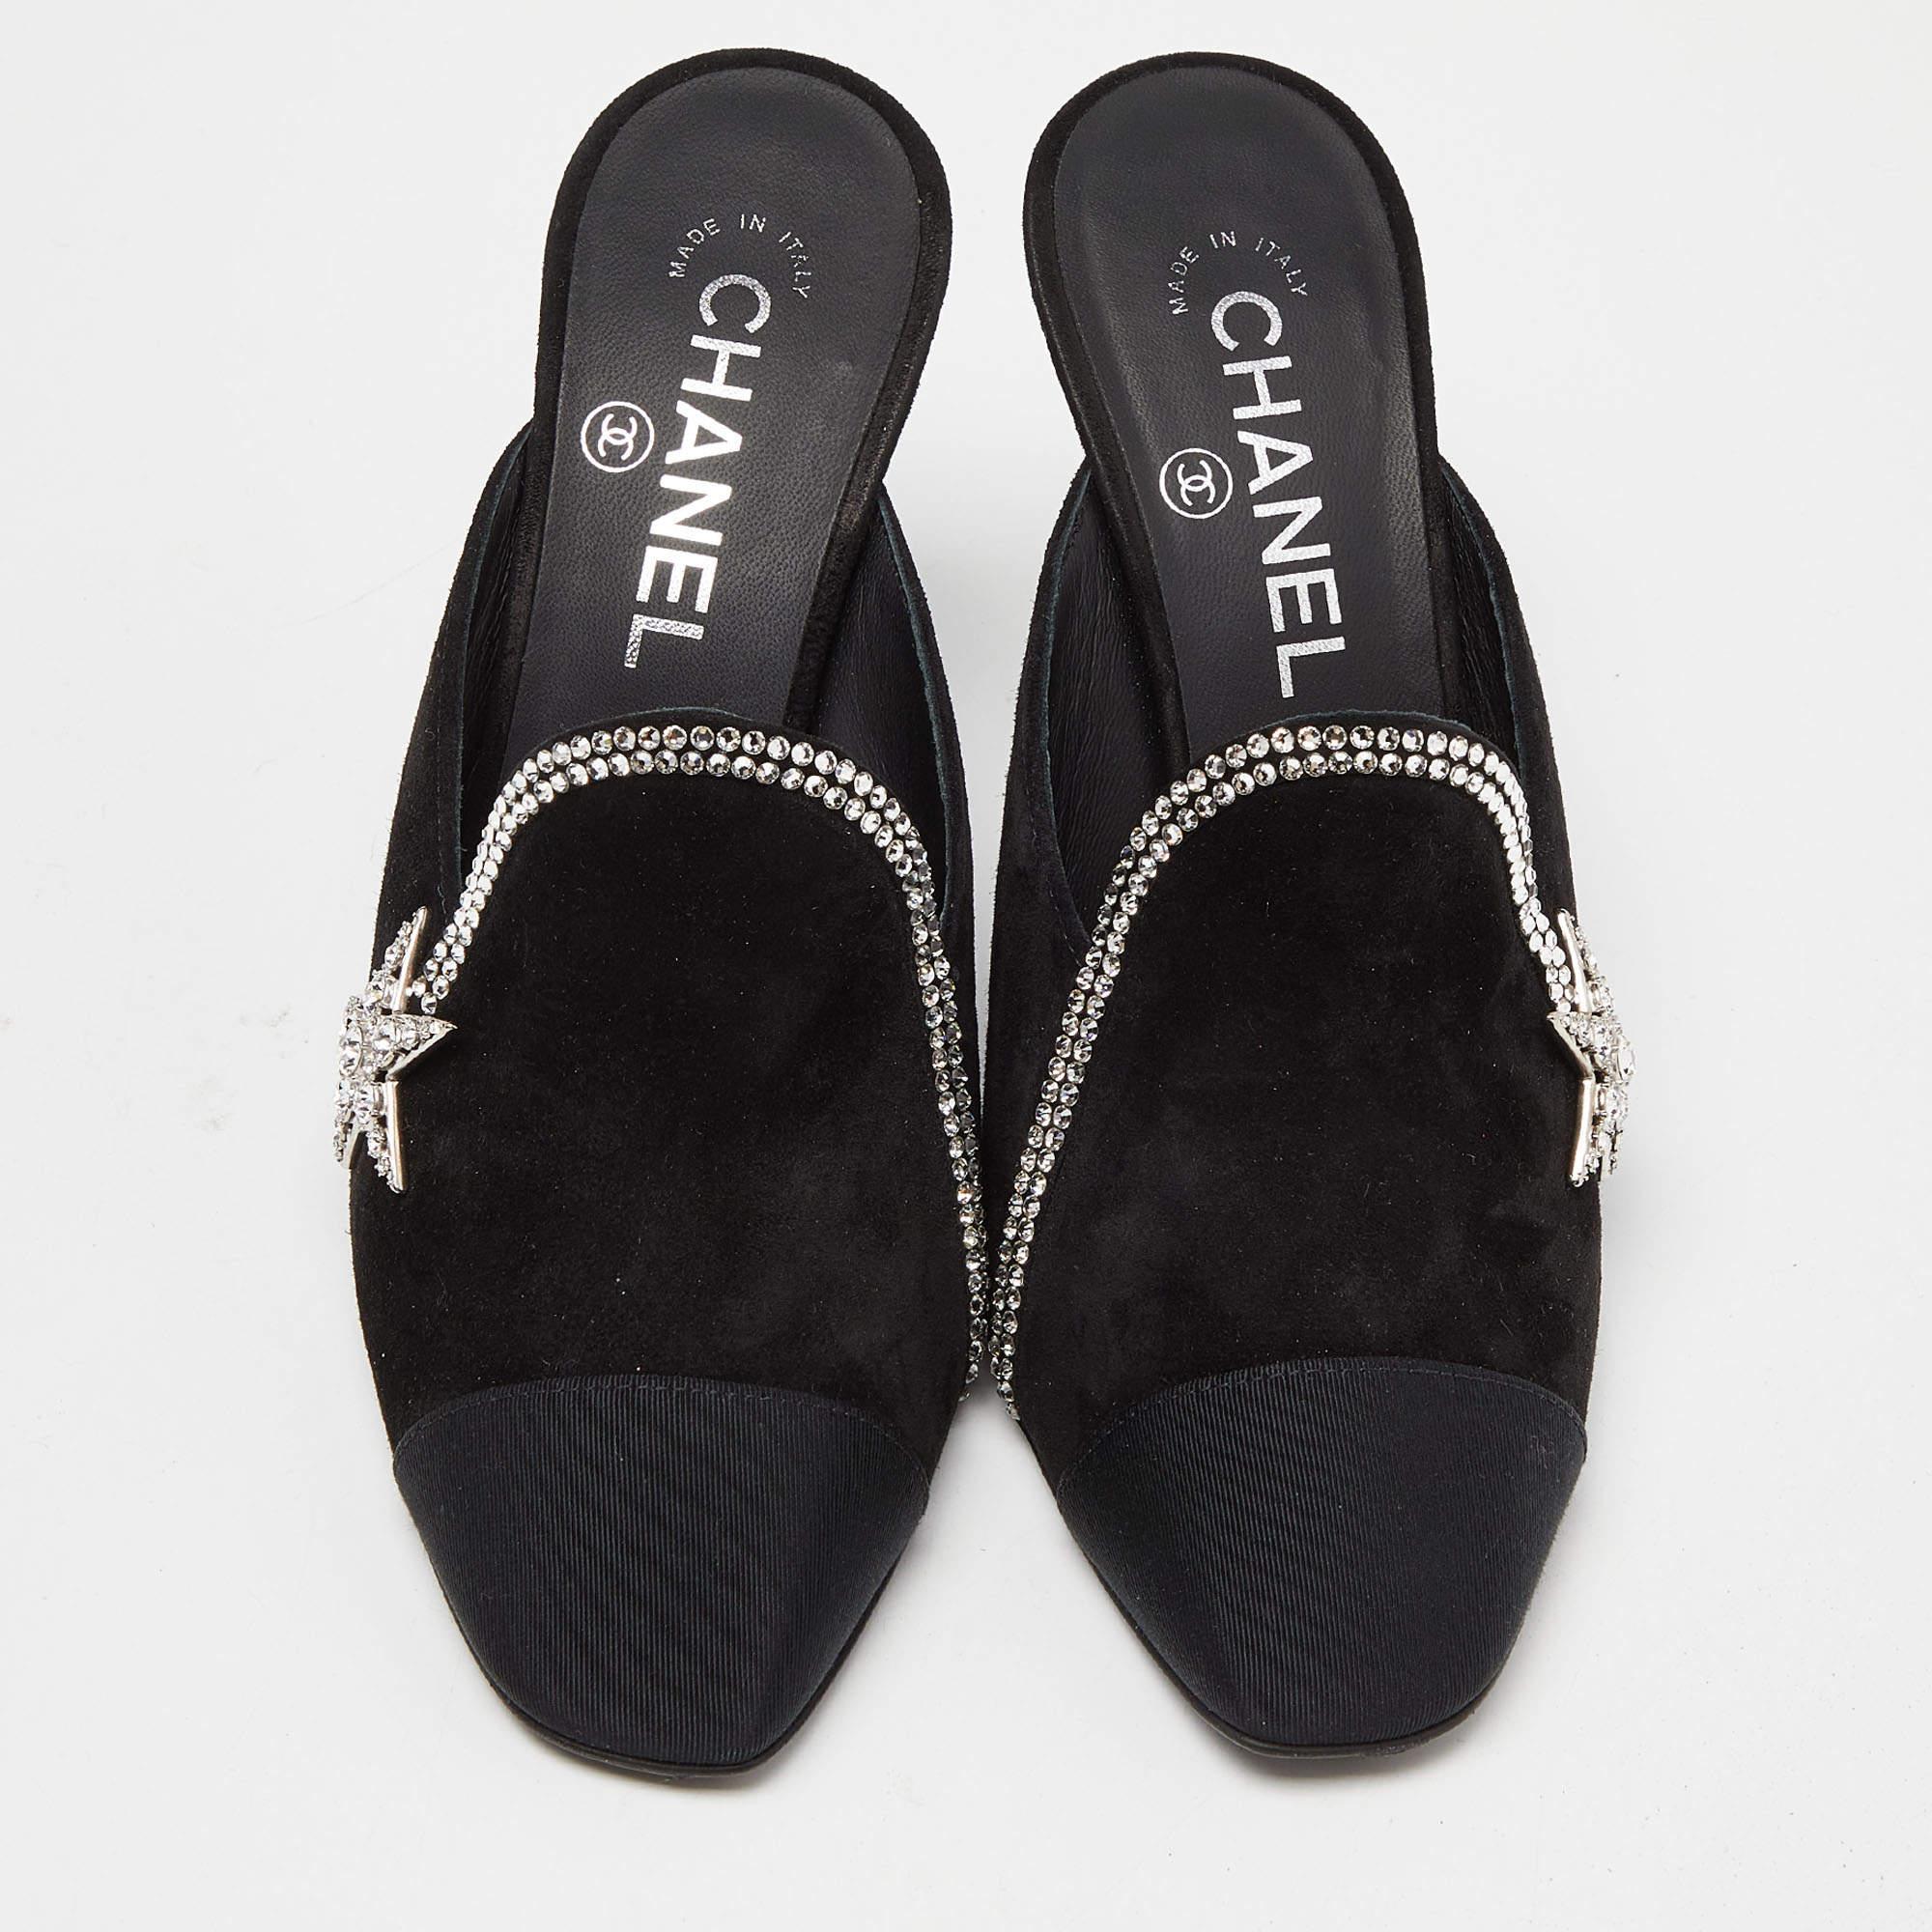 Discover footwear elegance with these Chanel women's mules. Meticulously designed, these heels seamlessly marry fashion and comfort, ensuring you shine in every setting.

Includes: Original Box, Info Booklet

